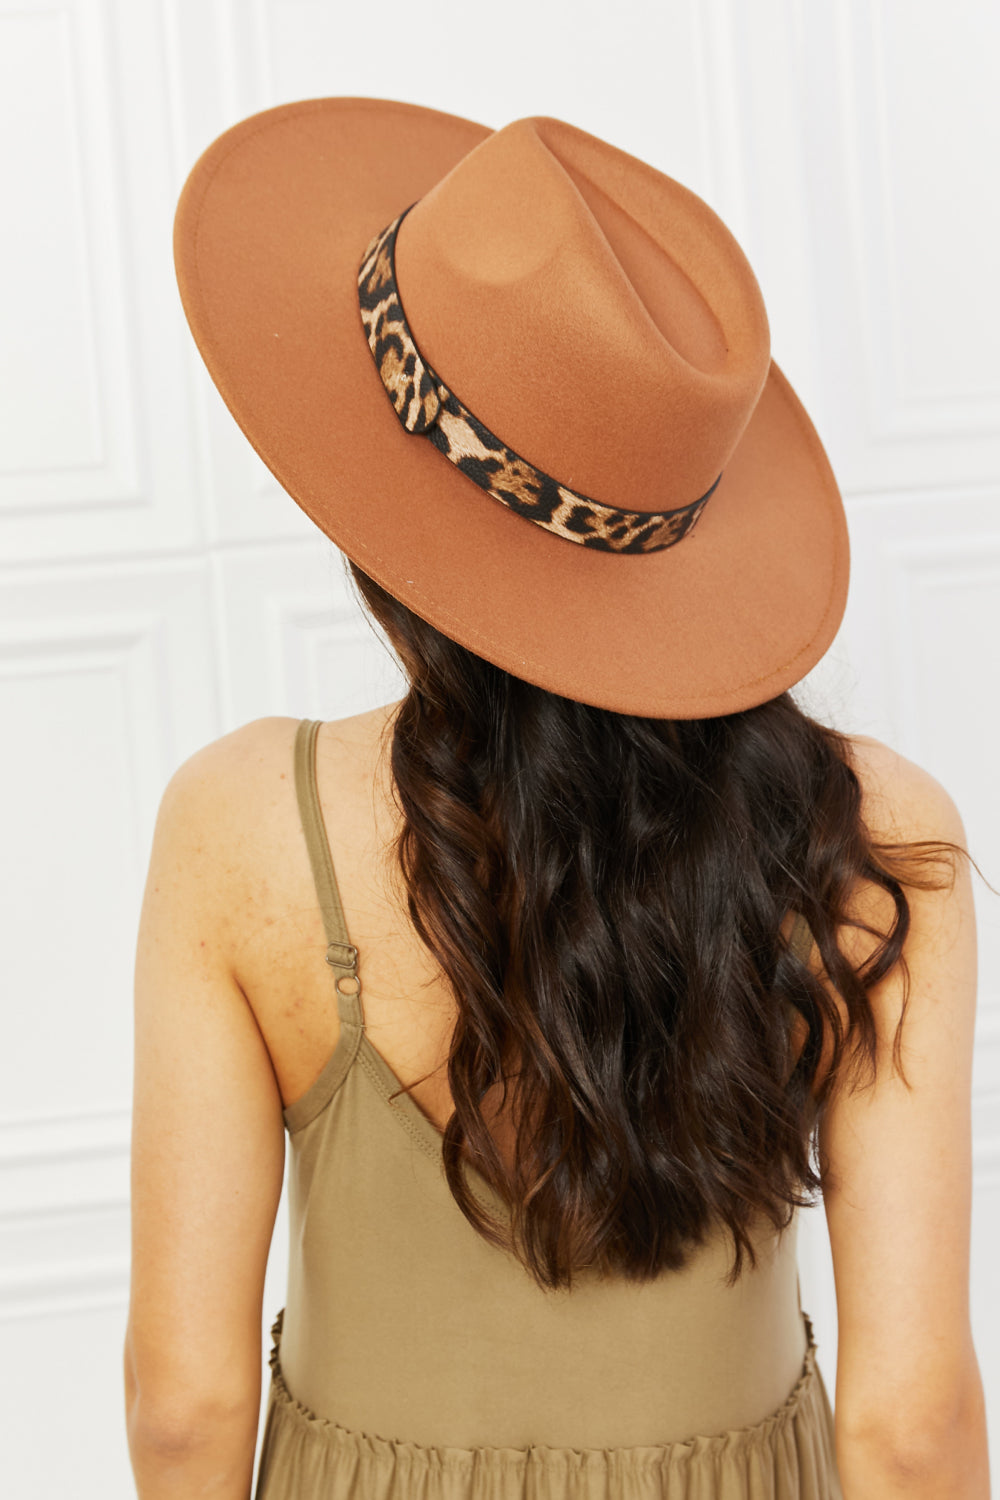 Fame In The Wild Leopard Detail Fedora Hat Print on any thing USA/STOD clothes